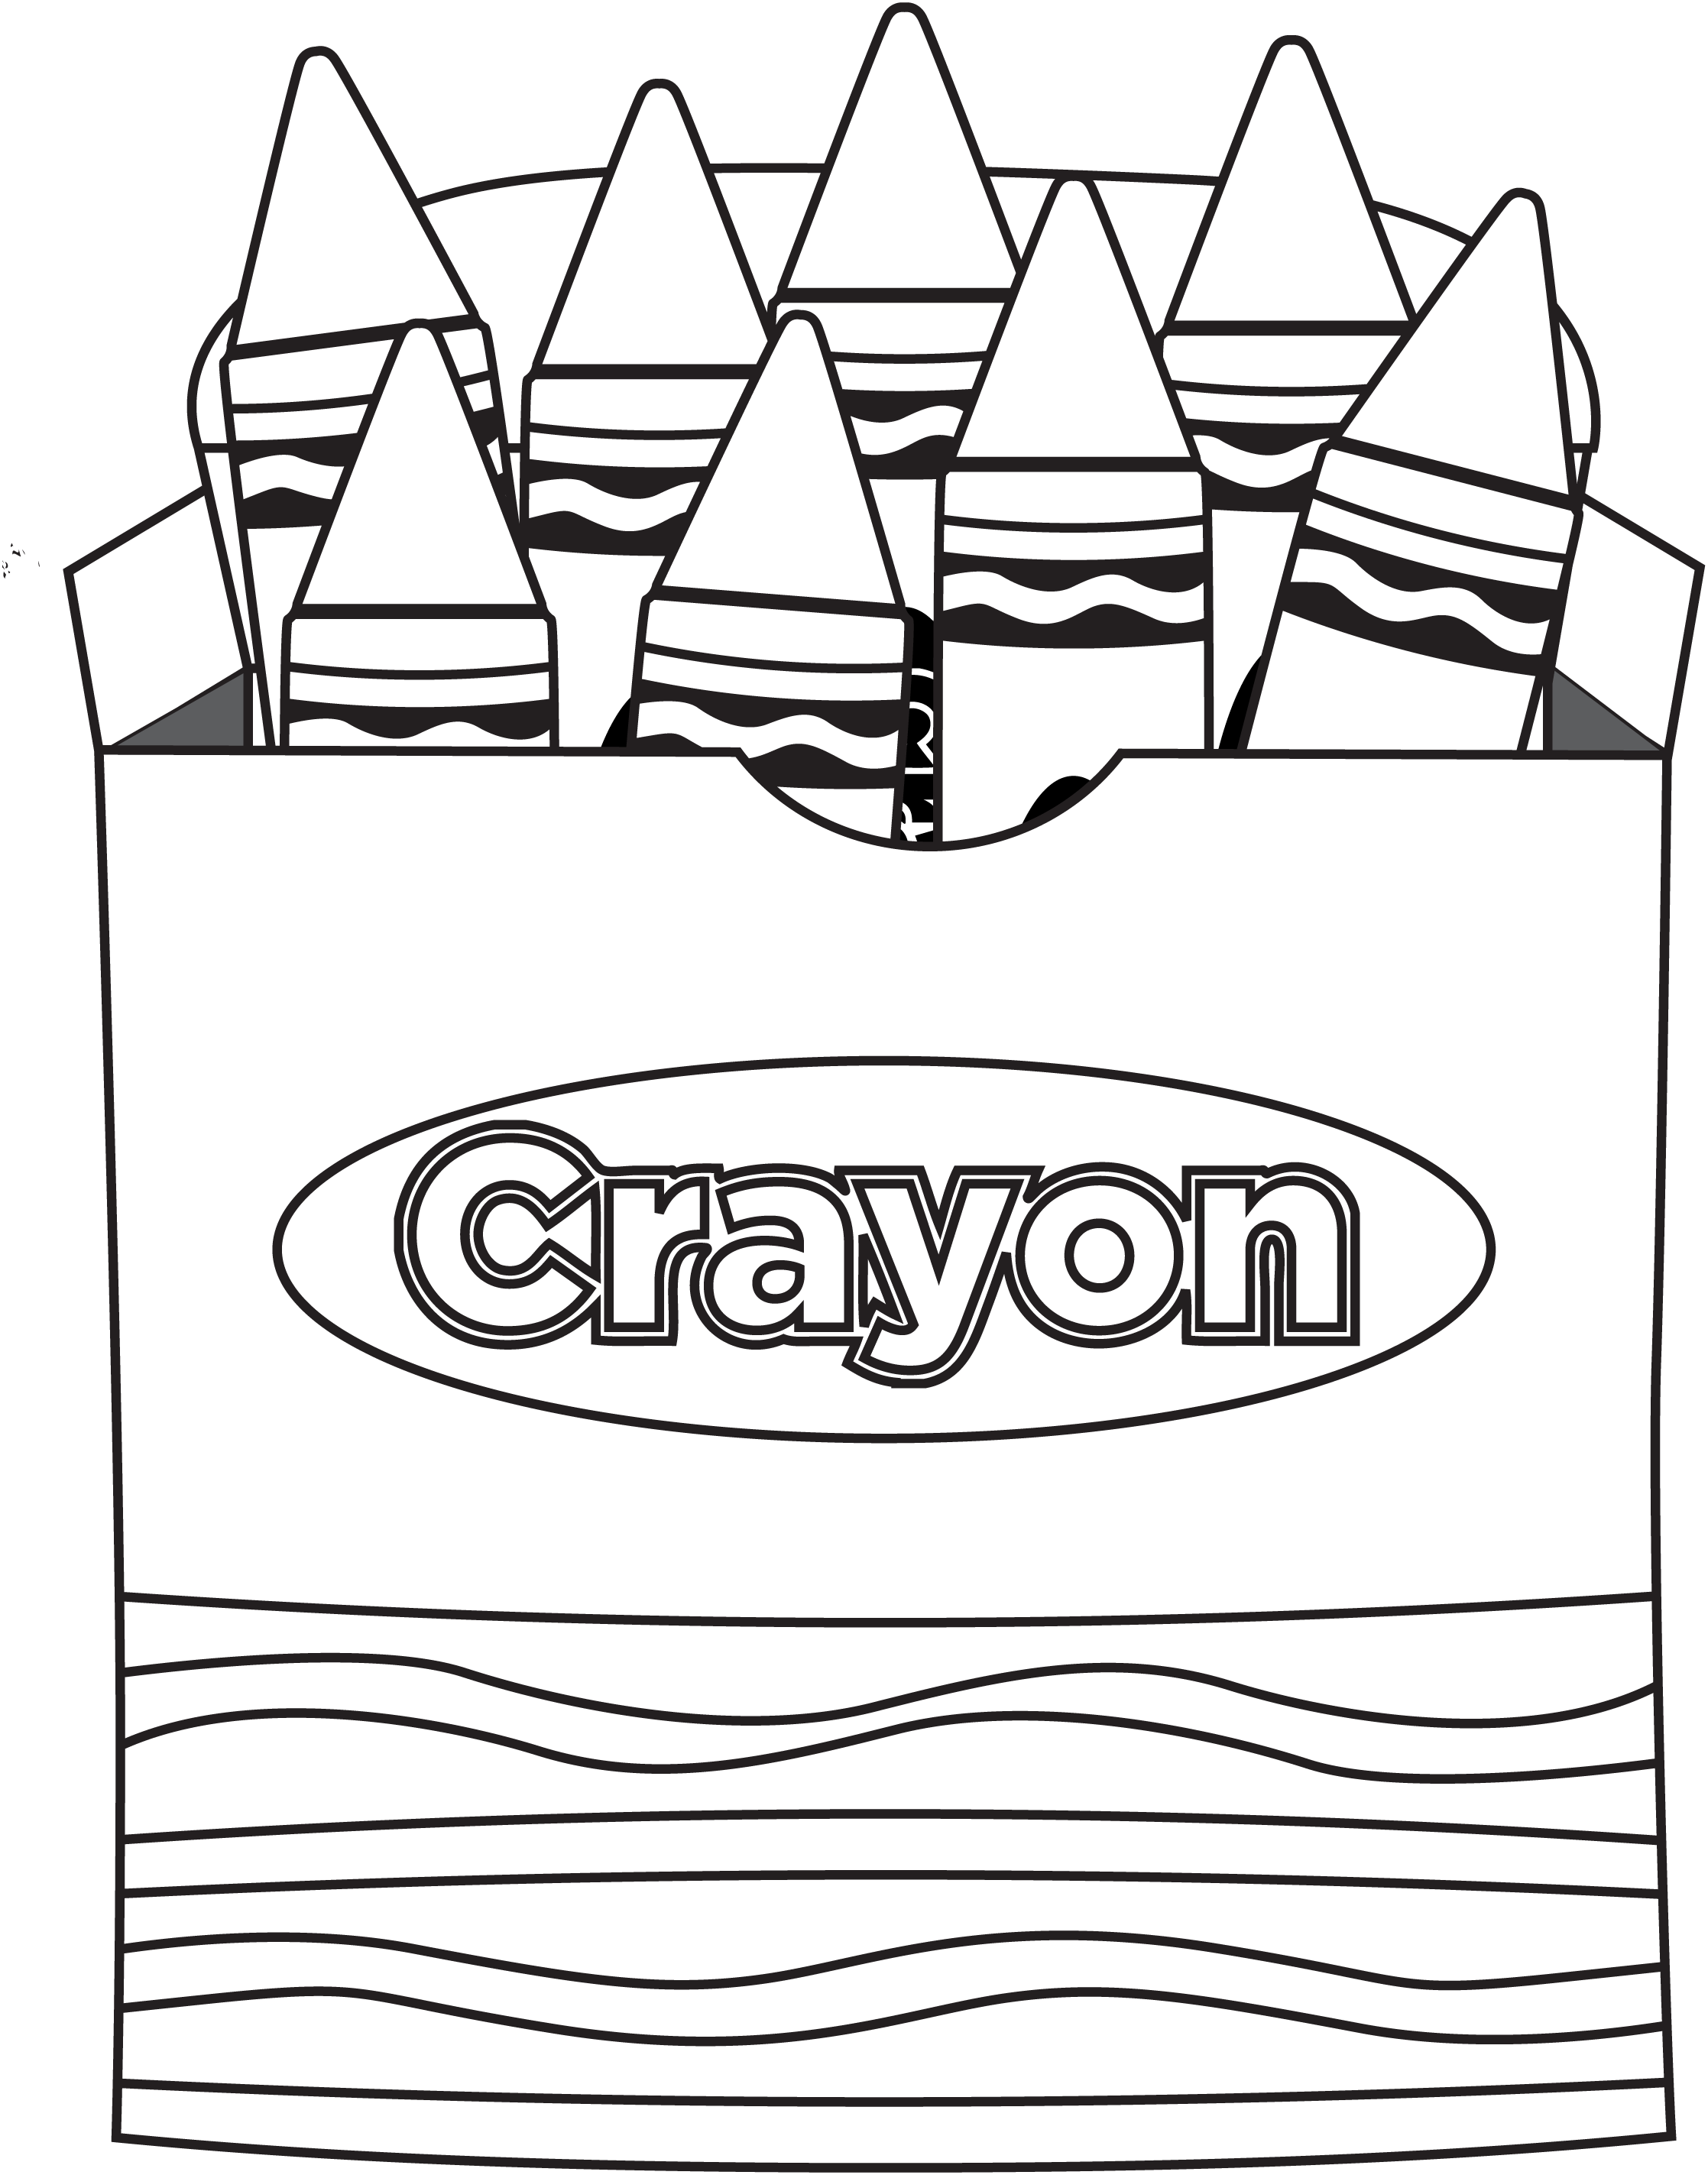 The Day the Crayons Quit coloring sheet